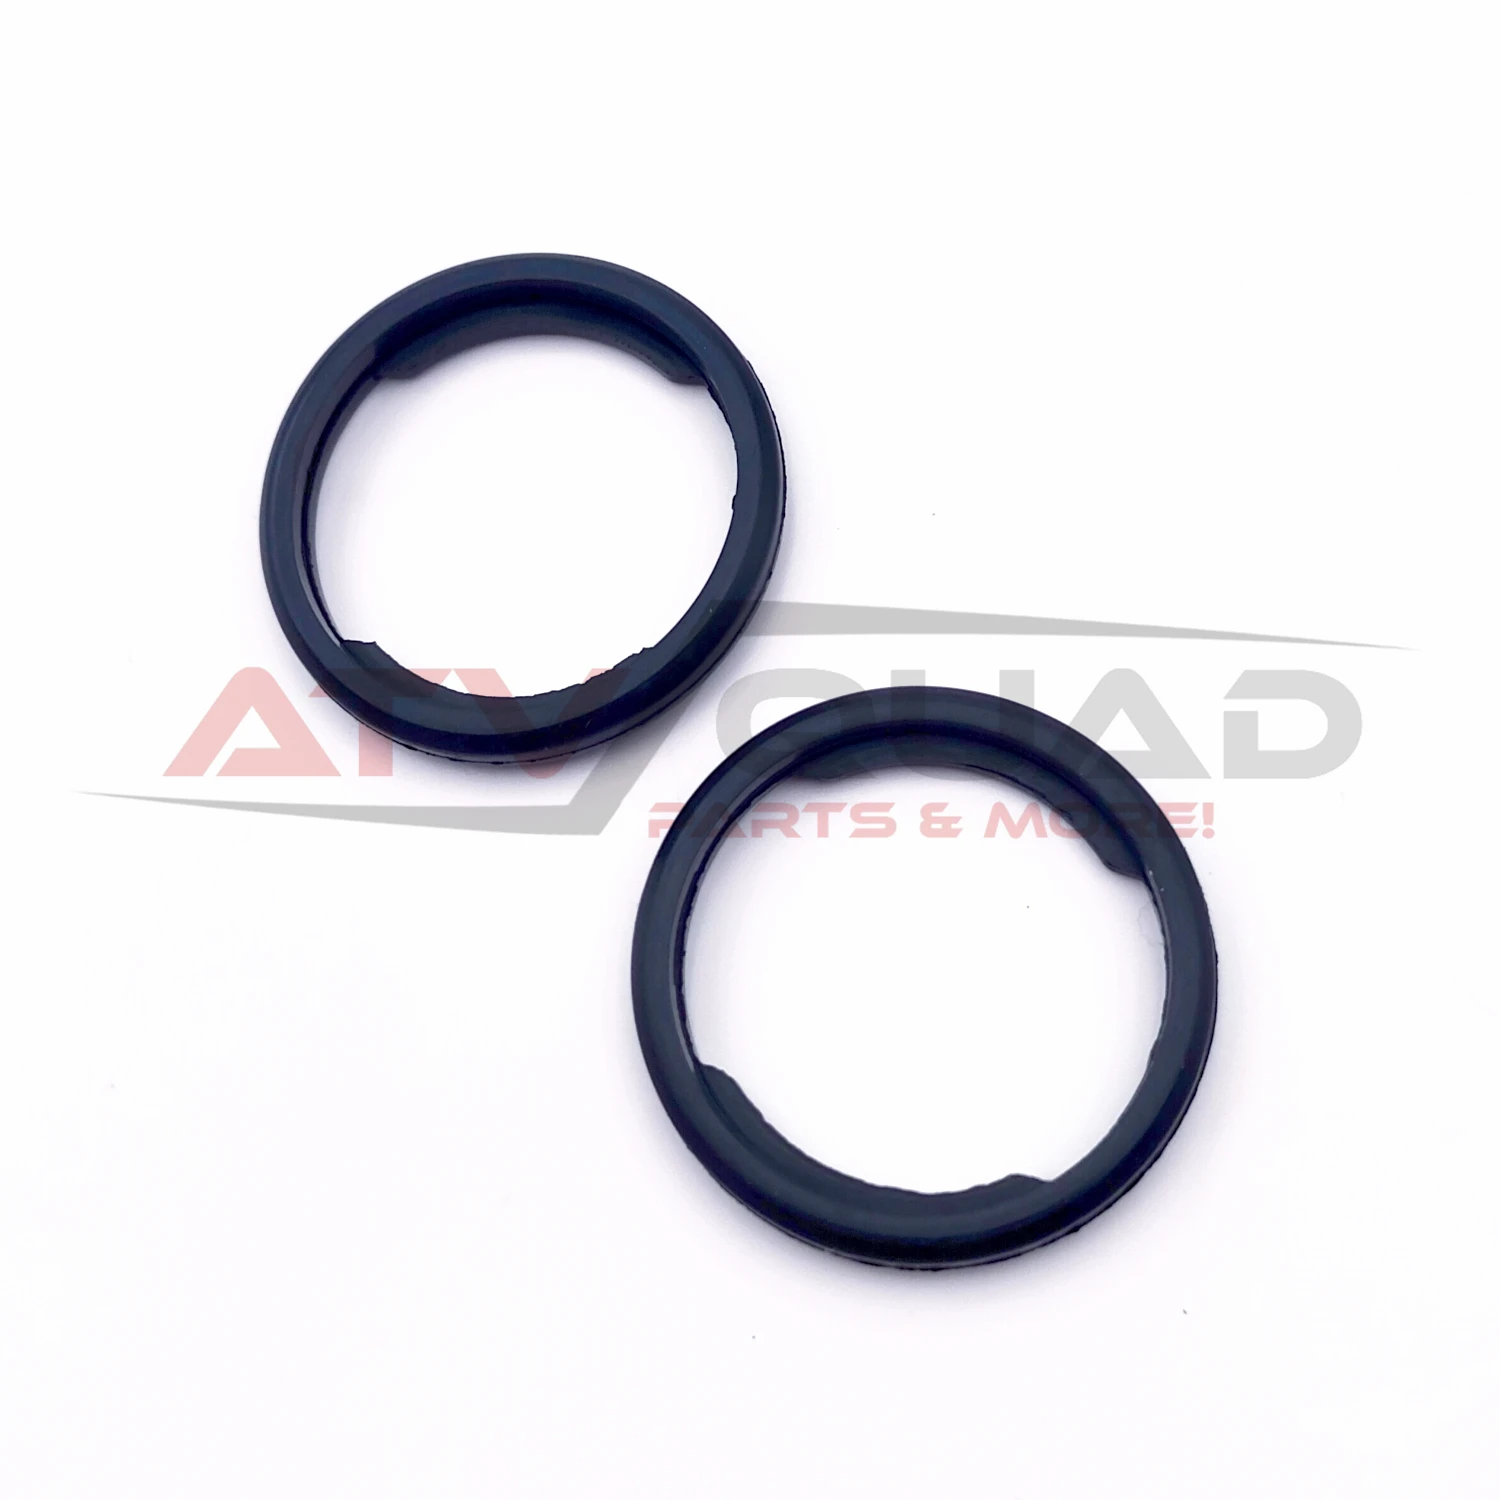 2PCS Thermostat Seal Ring for CFmoto 400 450 500S 520 550 600 Touring 625 800 800EX 800XC 850 X8H.O. 950 950EX 1000 0010-022802 2pcs 144mm shockproof rubber ring motor washer vacuum cleaner motor seal ring vacuum sweeper cushion ring